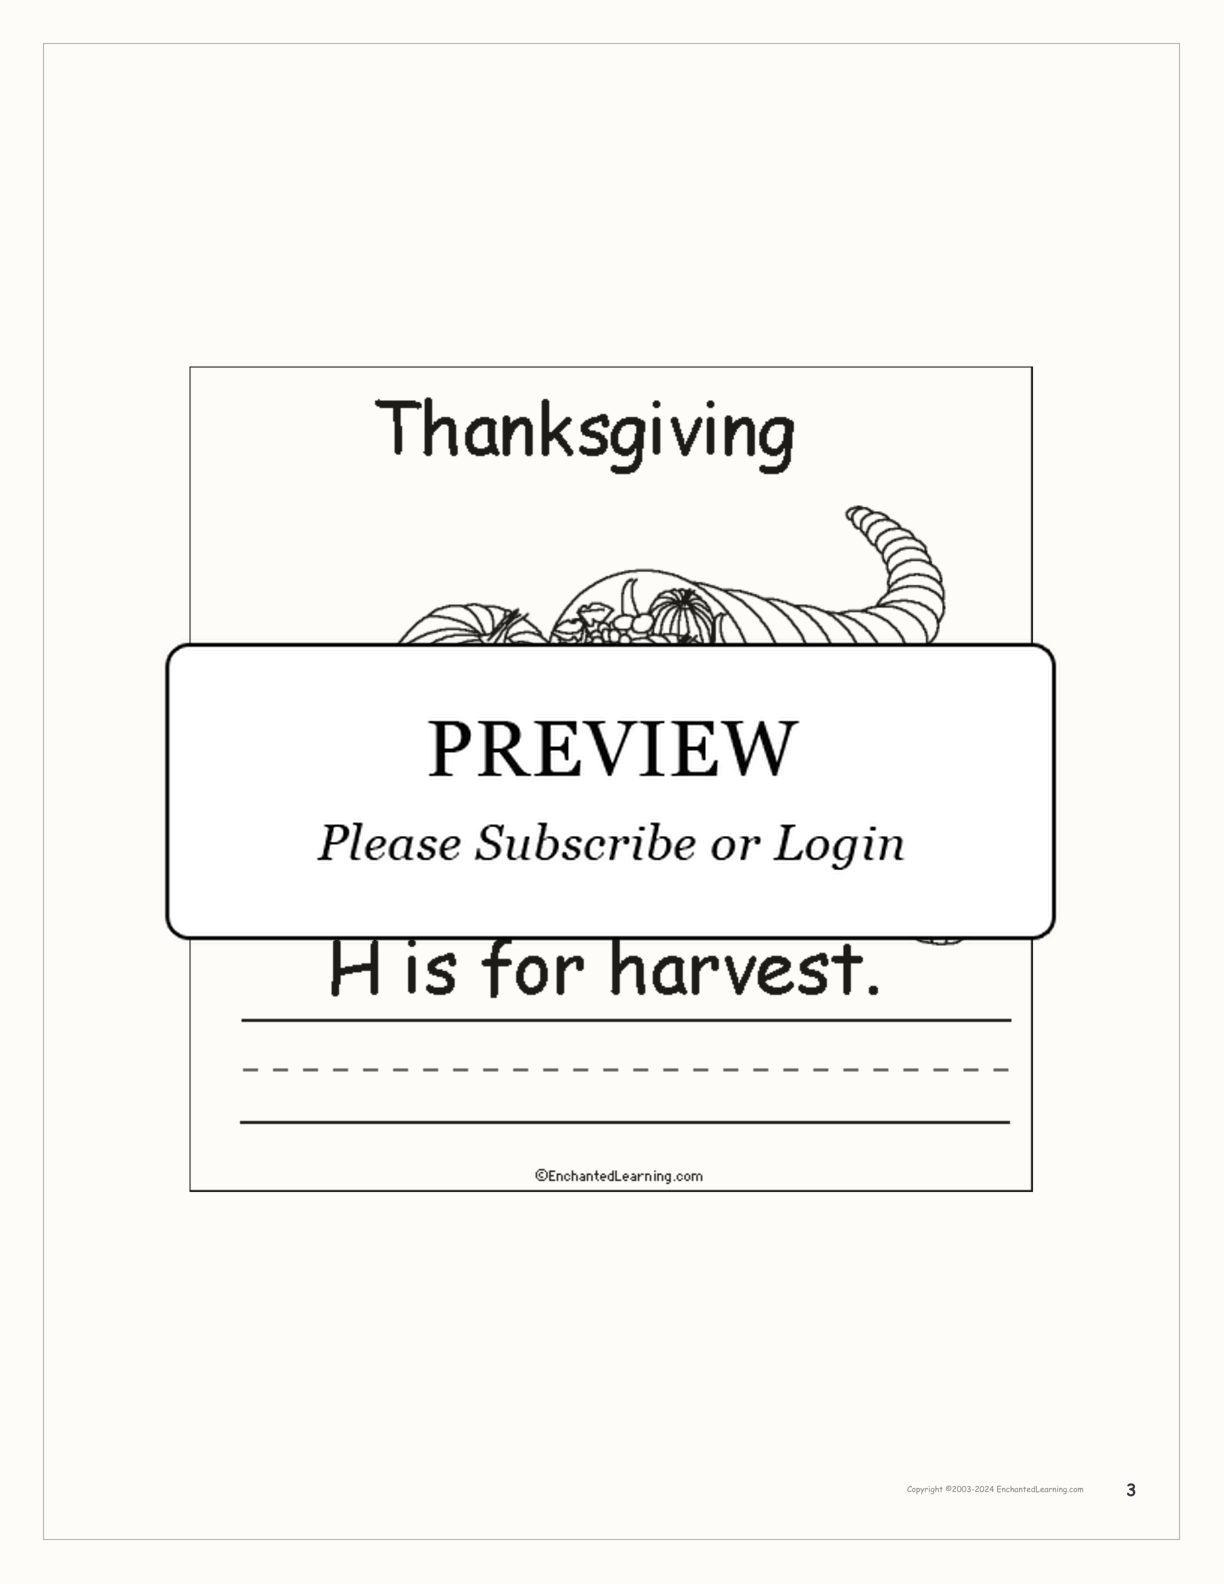 'Thanksgiving is for...' Book for Early Readers interactive printout page 3